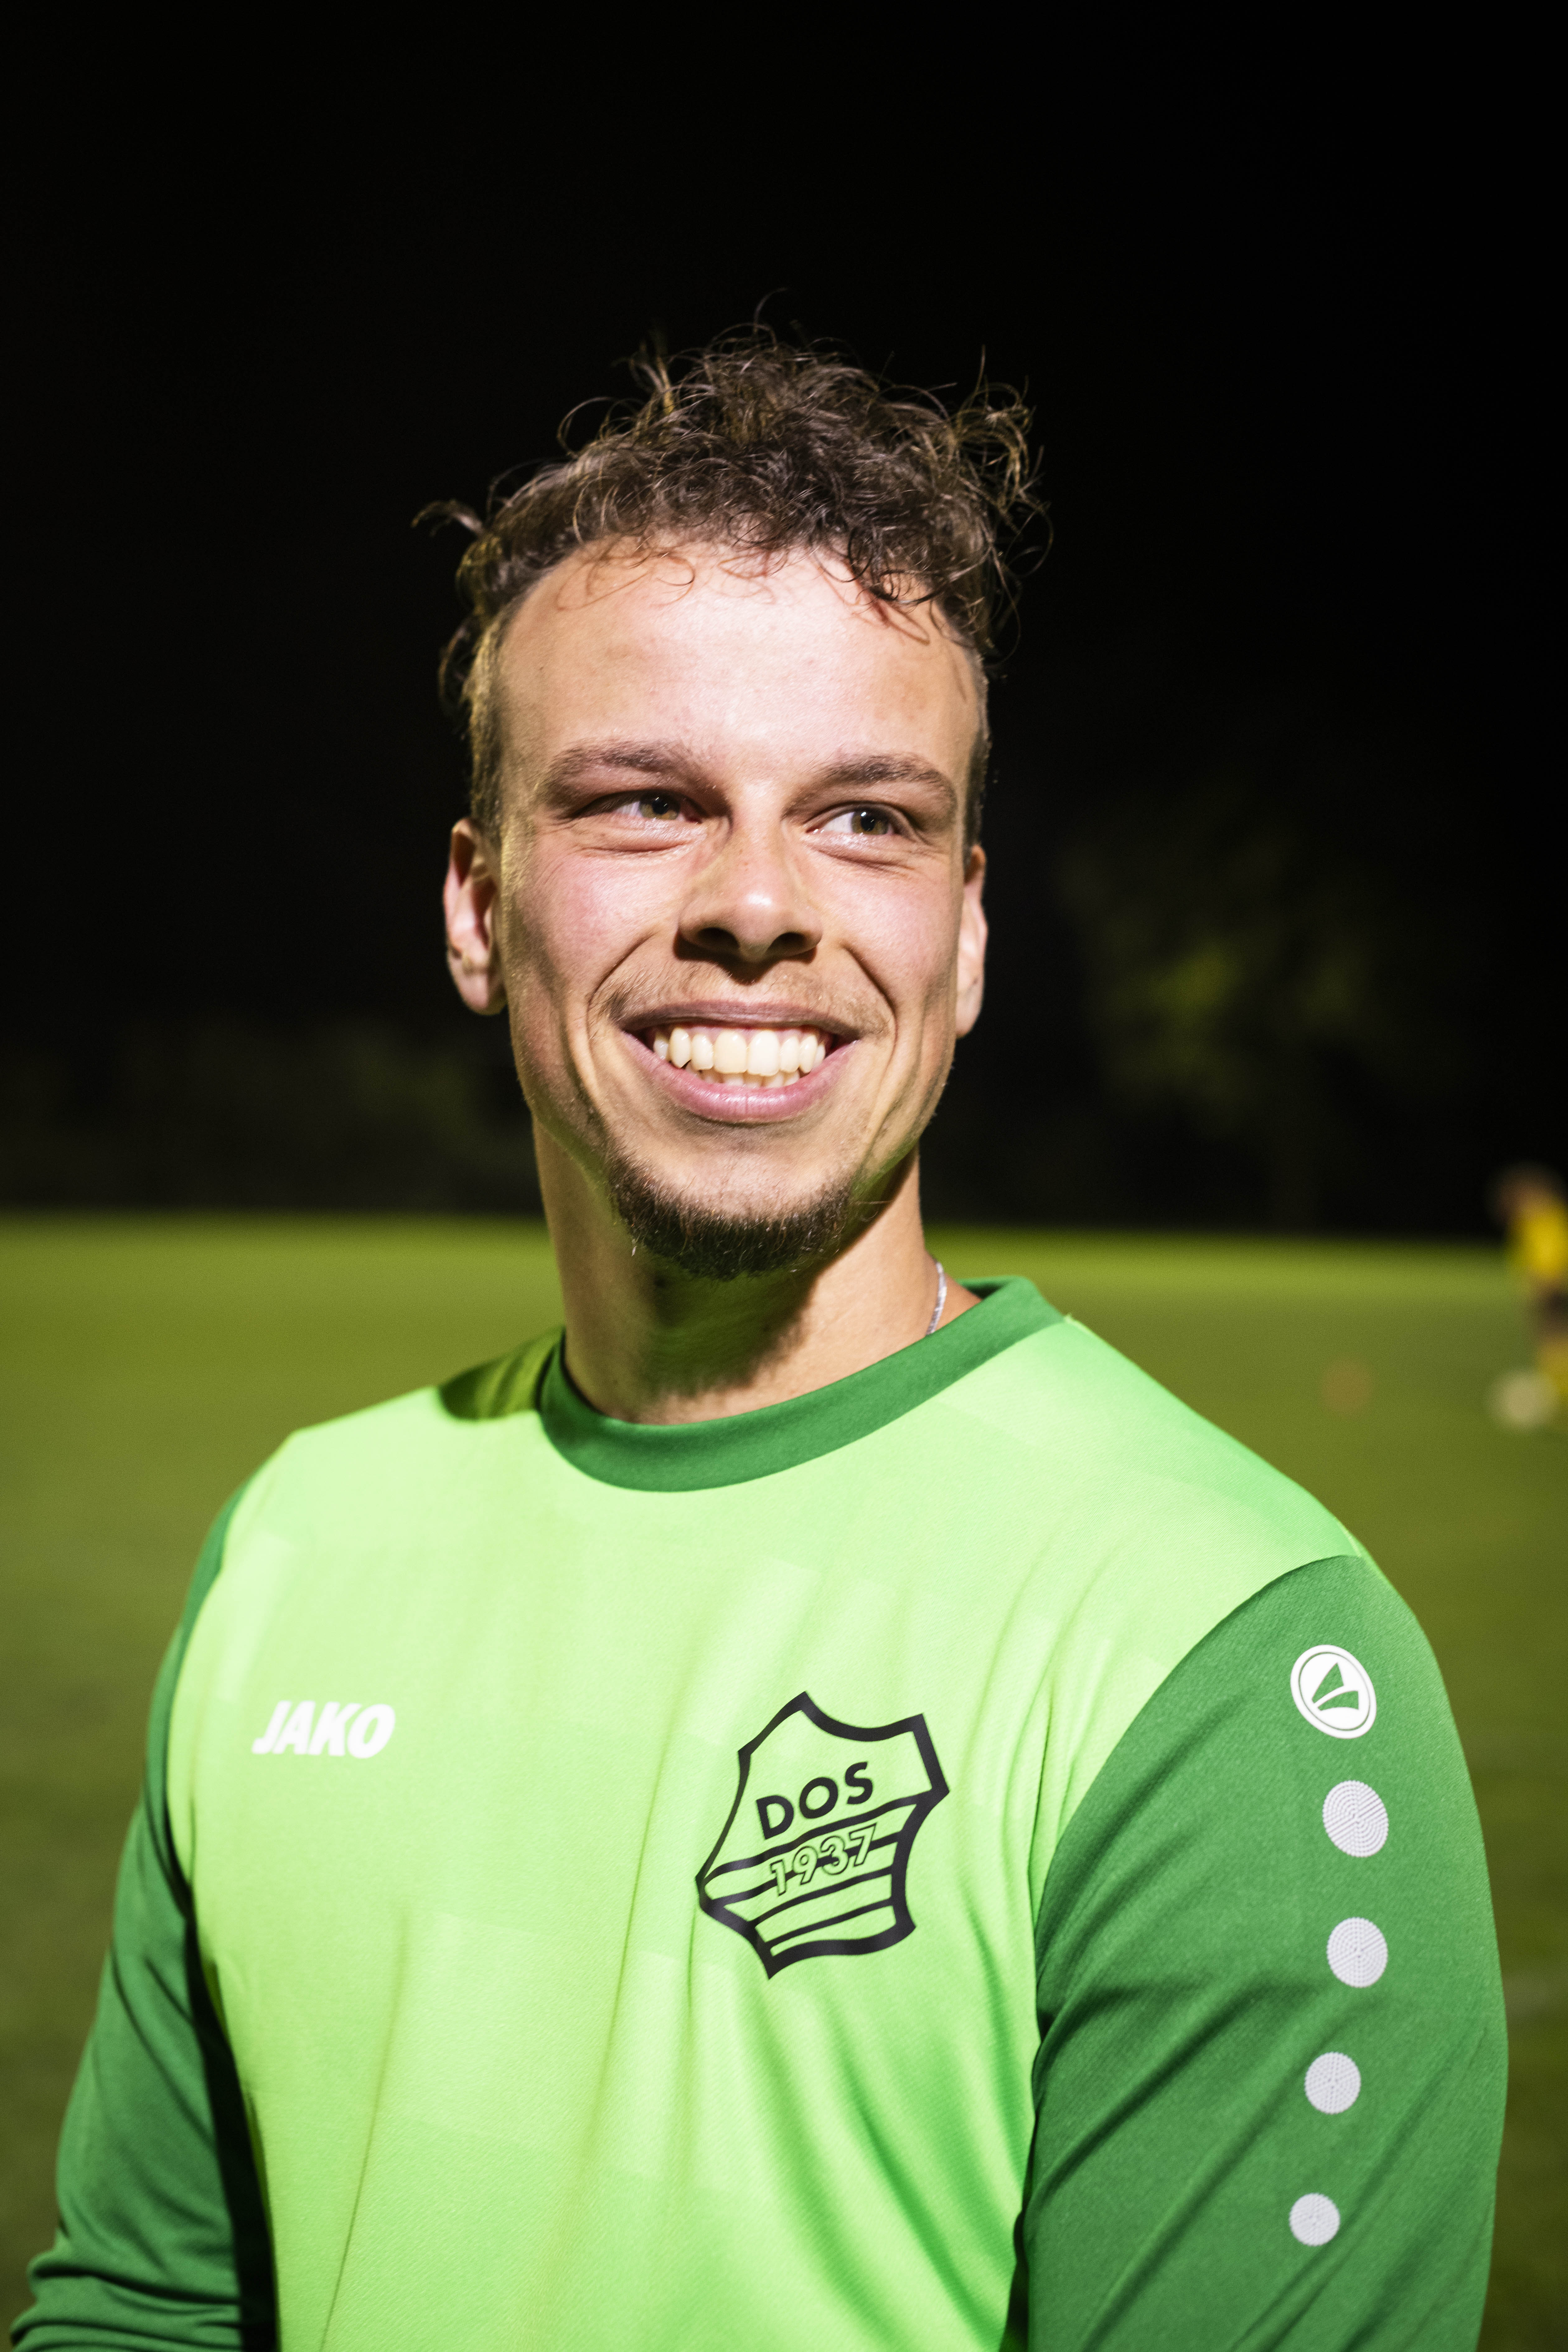 portrait of a football player smiling, they're dressed in a long-sleeved green sports top